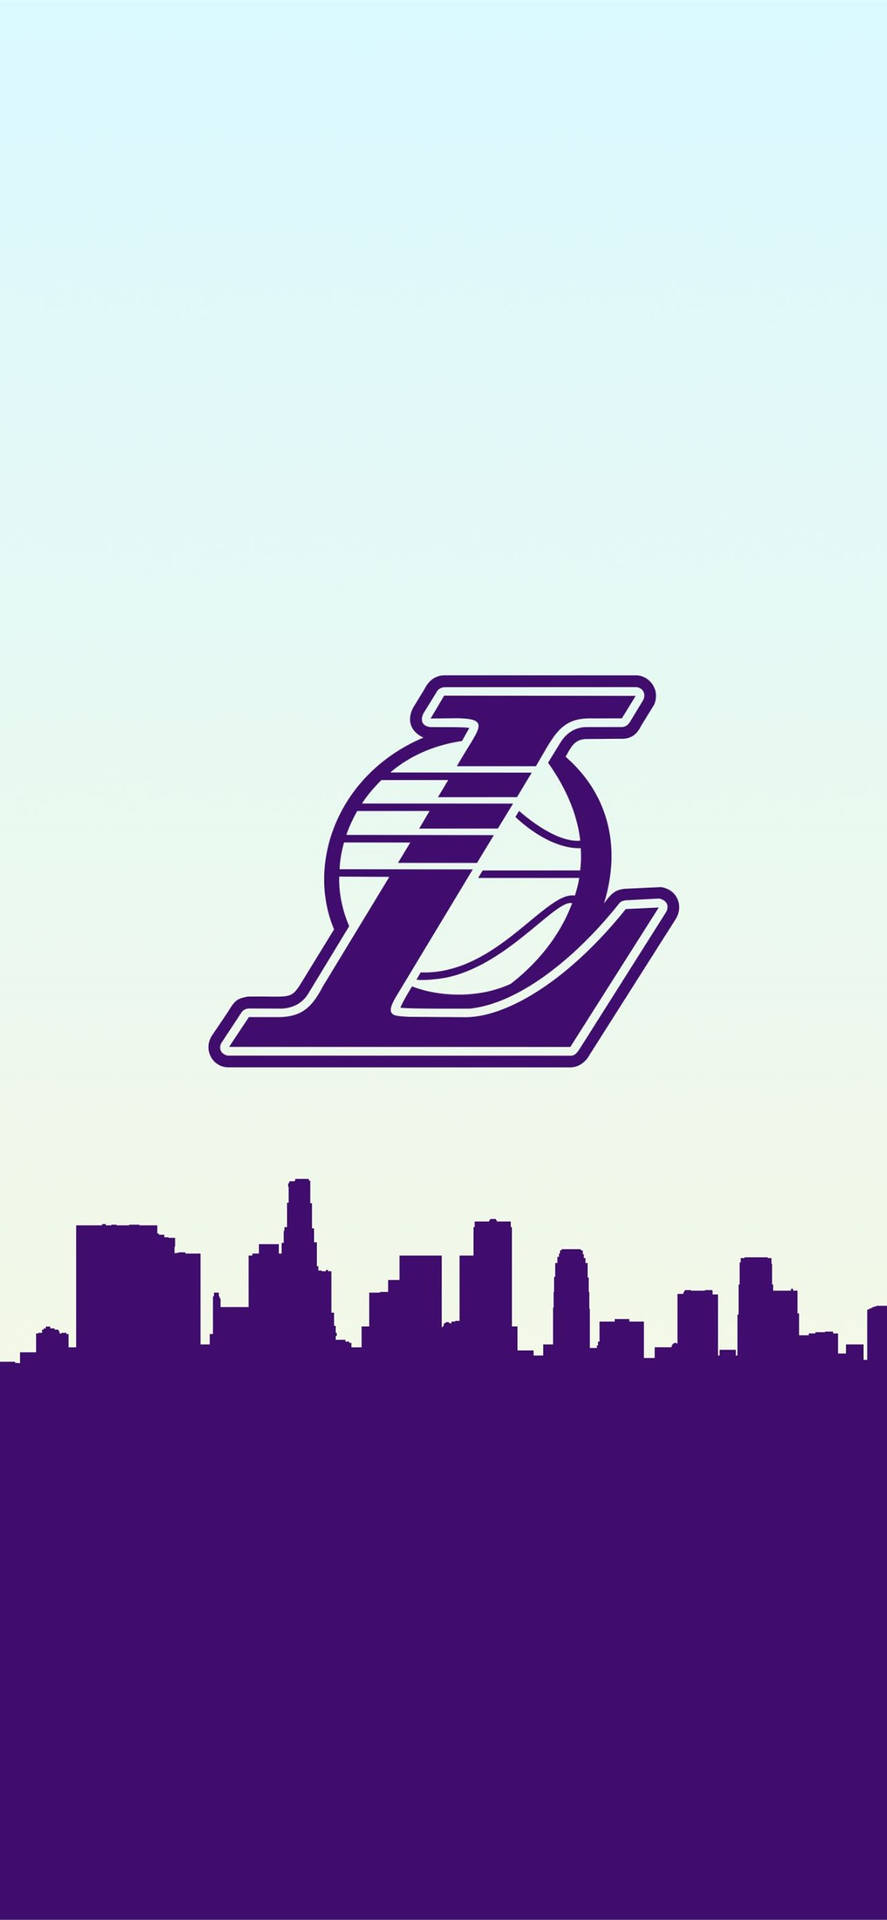 Show your Lakers spirit with this one-of-a-kind iPhone Wallpaper